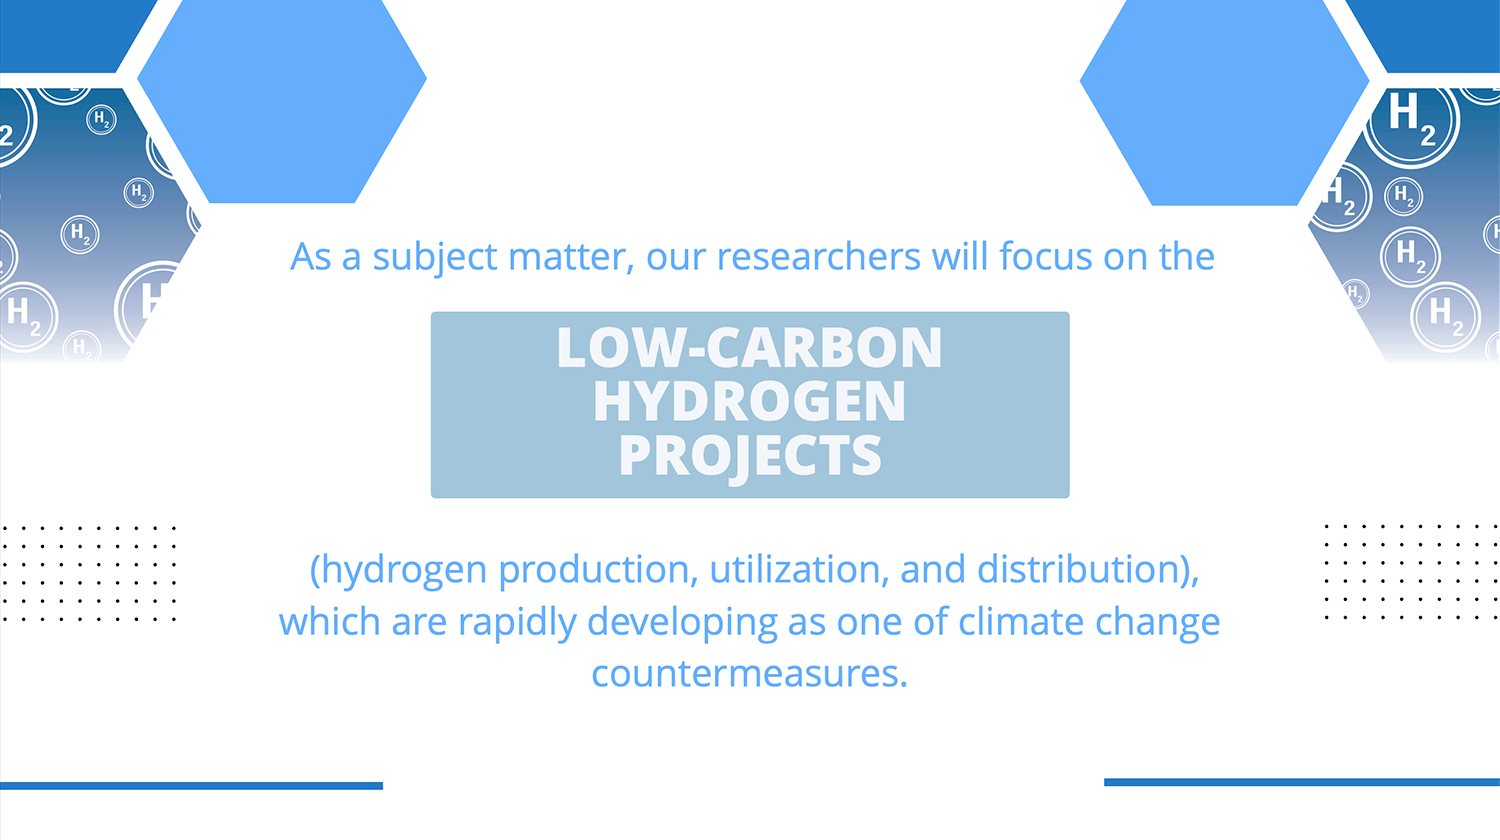 As a subject matter, our researchers will focus on the LOW-CARBON HYDROGEN PROJECTS